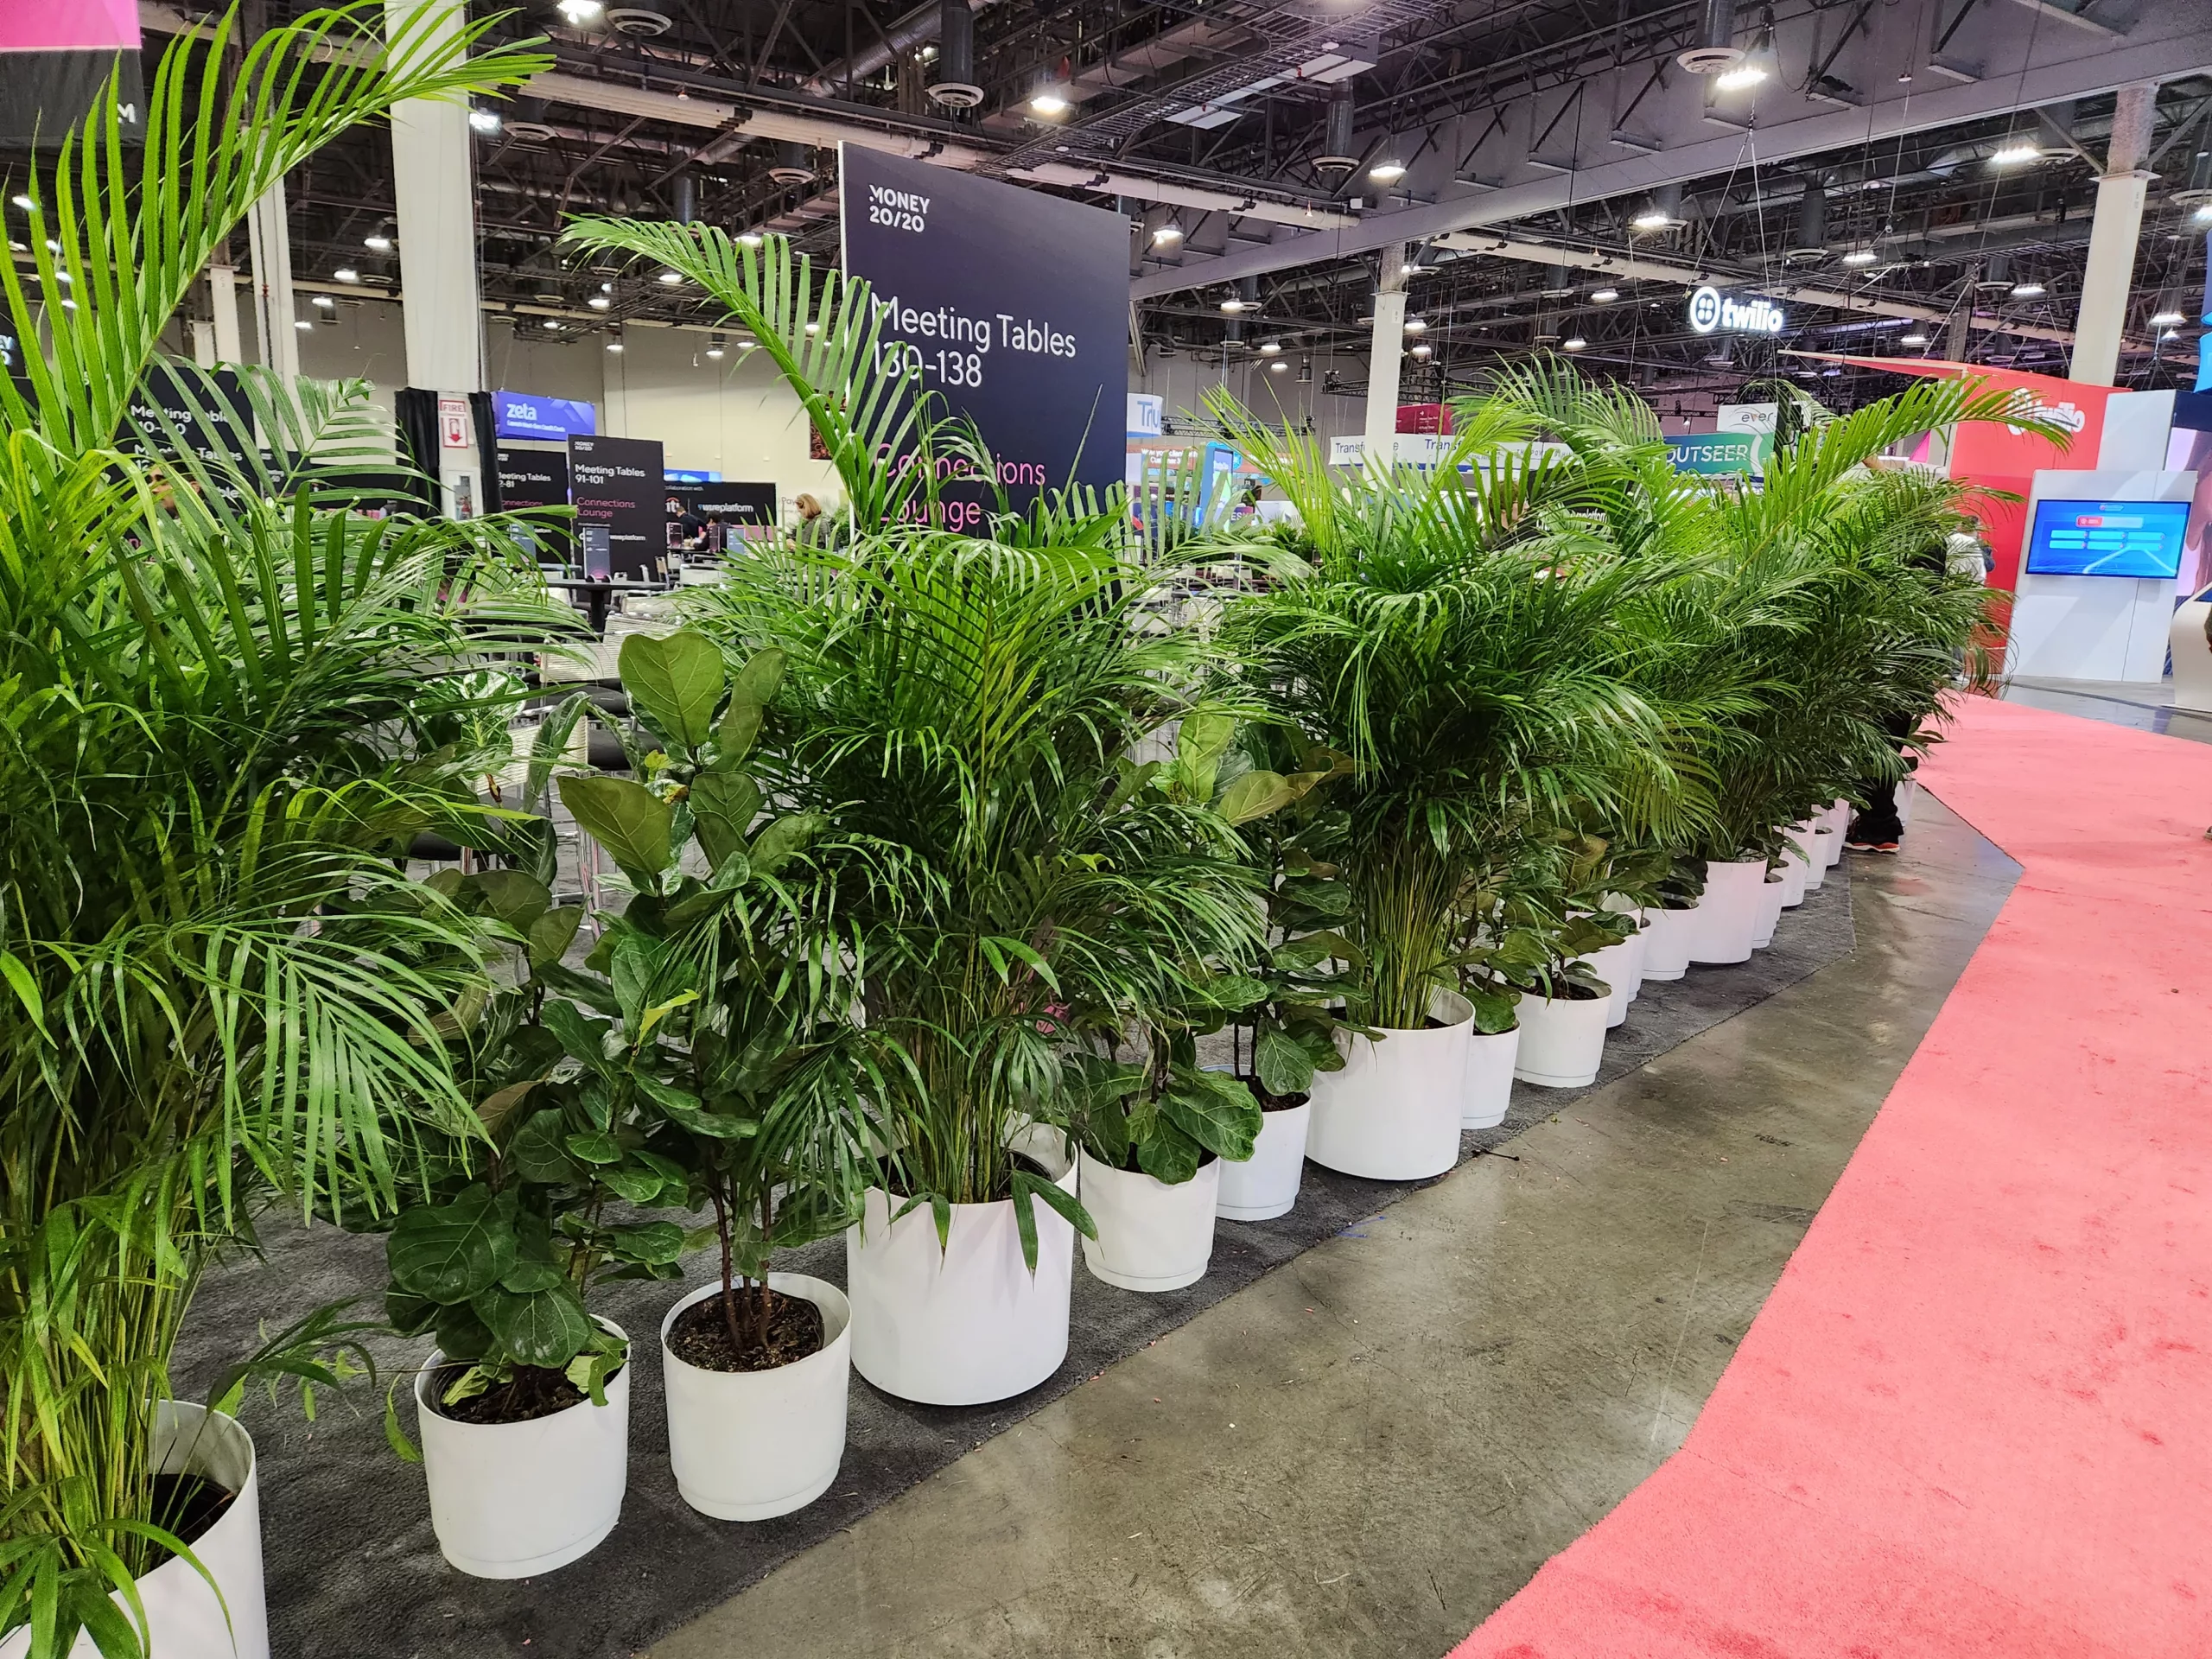 Tall plants as a screening at a trade show booth.